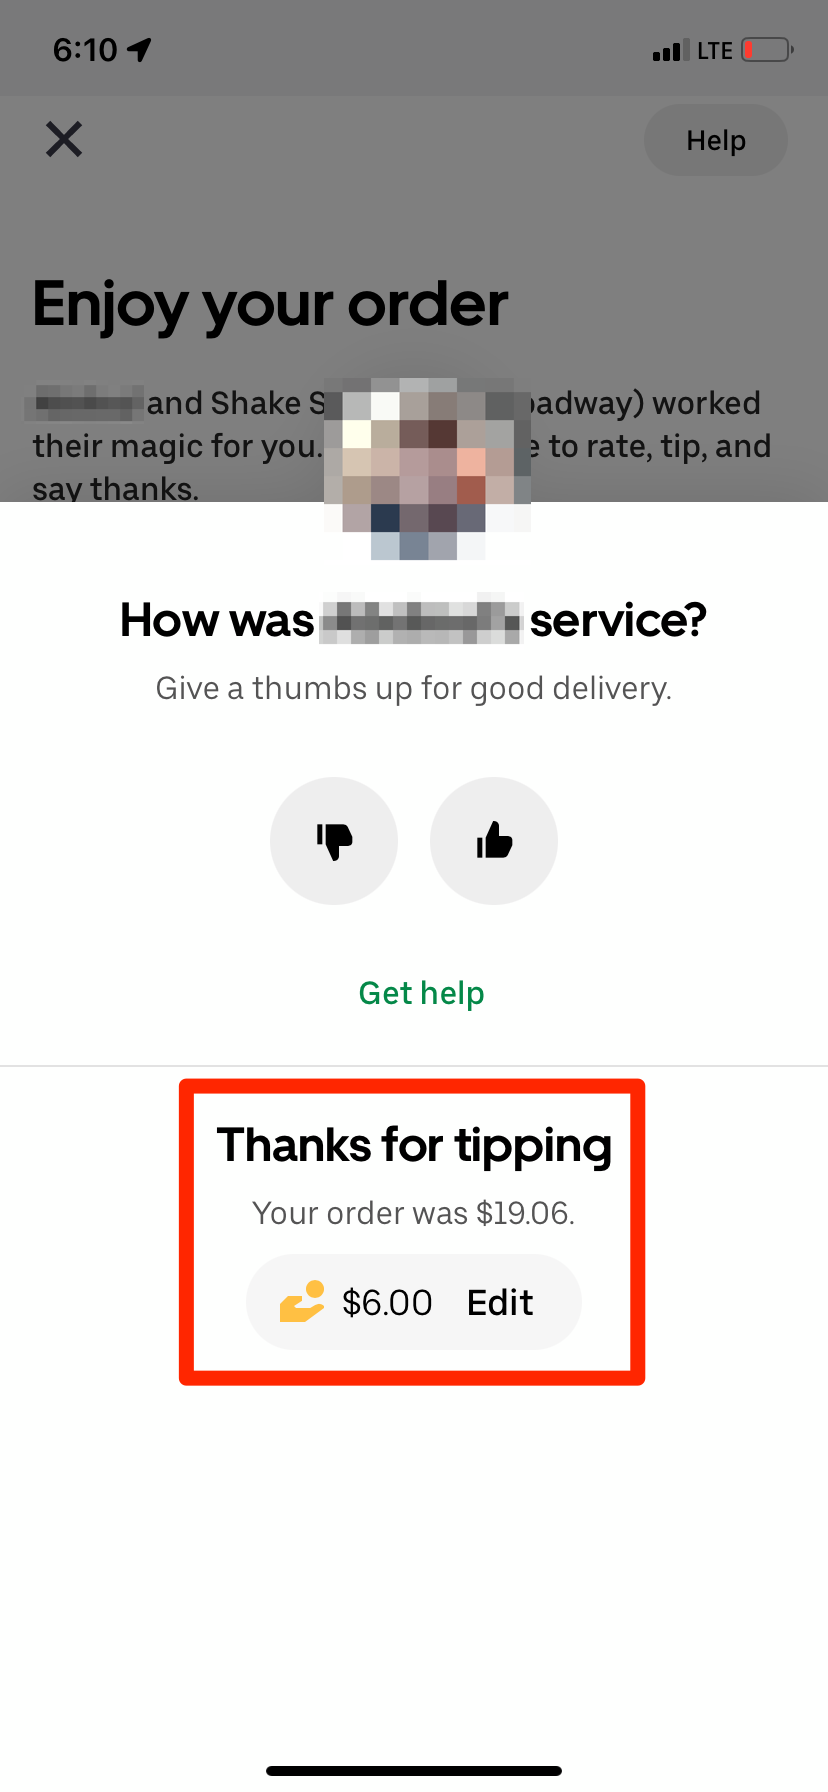 The screen that appears in the Uber Eats app when your order is delivered.